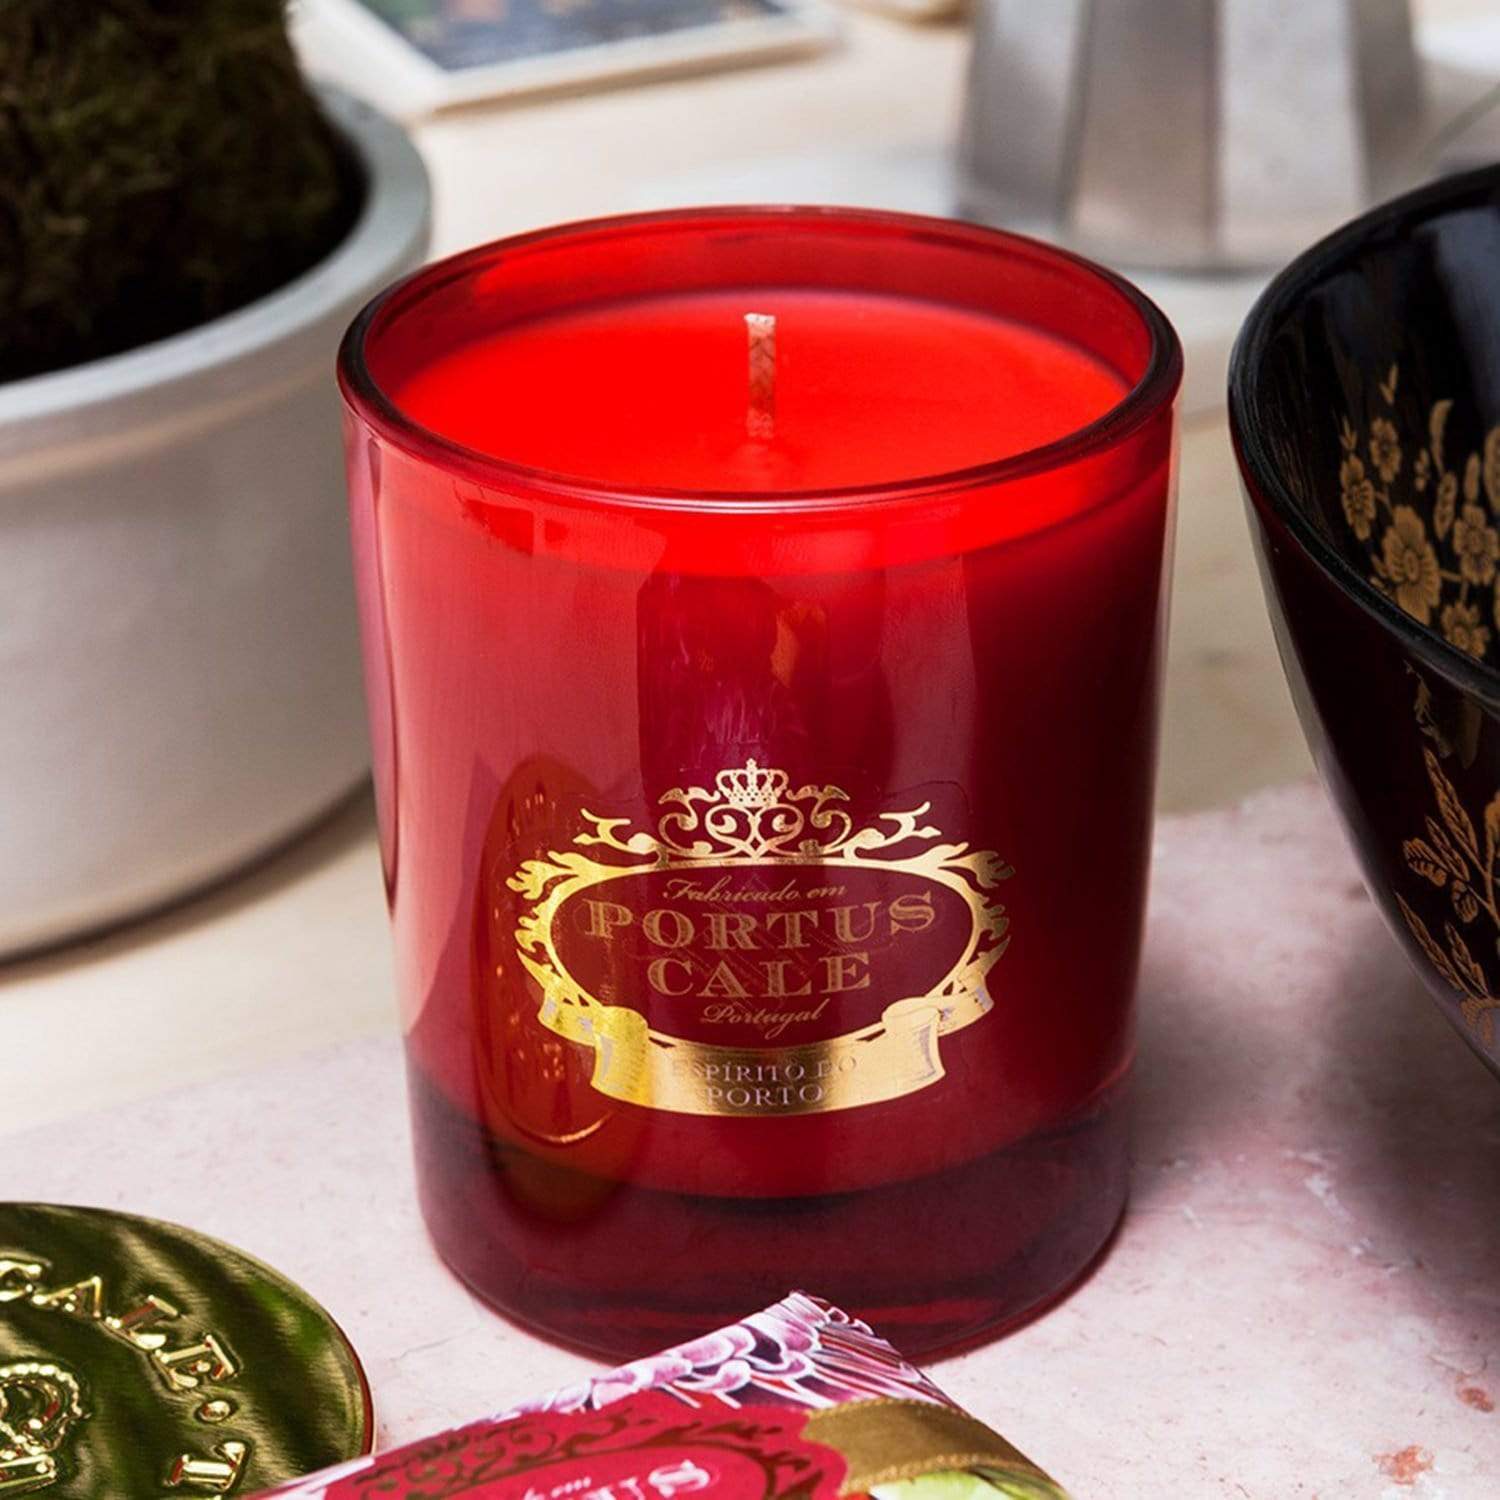 Castelbel Portus Cale Noble Red Glass Candle - C2-2402 - Jashanmal Home